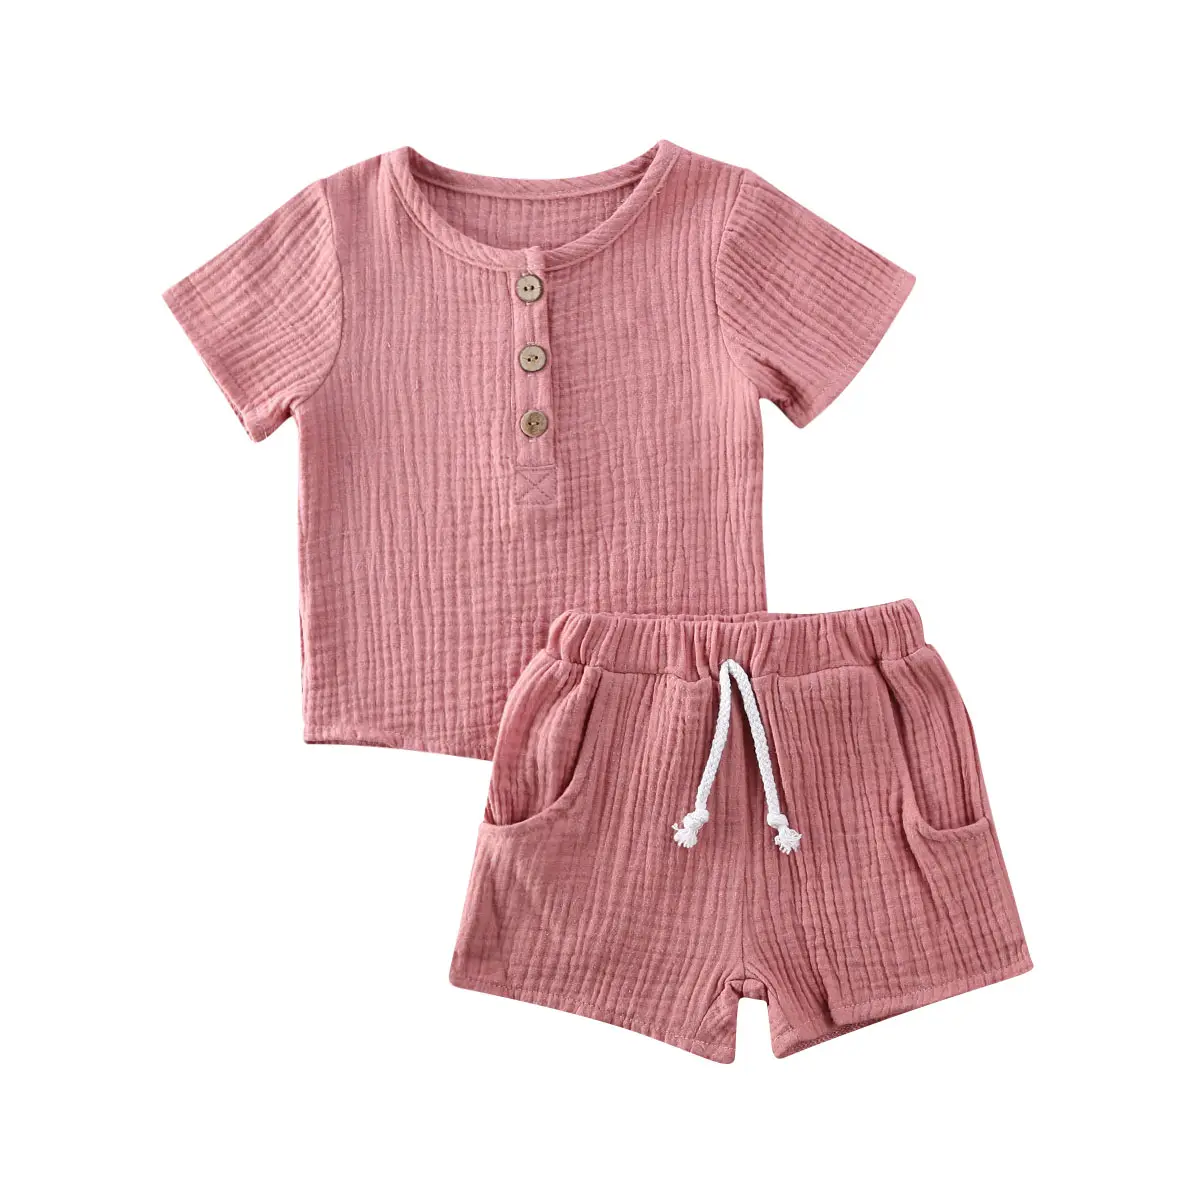 BKD Casual Infant Toddler Suit Baby Girl Accessories Set Baby Basic Top Cotton Organic Cotton Baby Suit Summer OEM Service Short